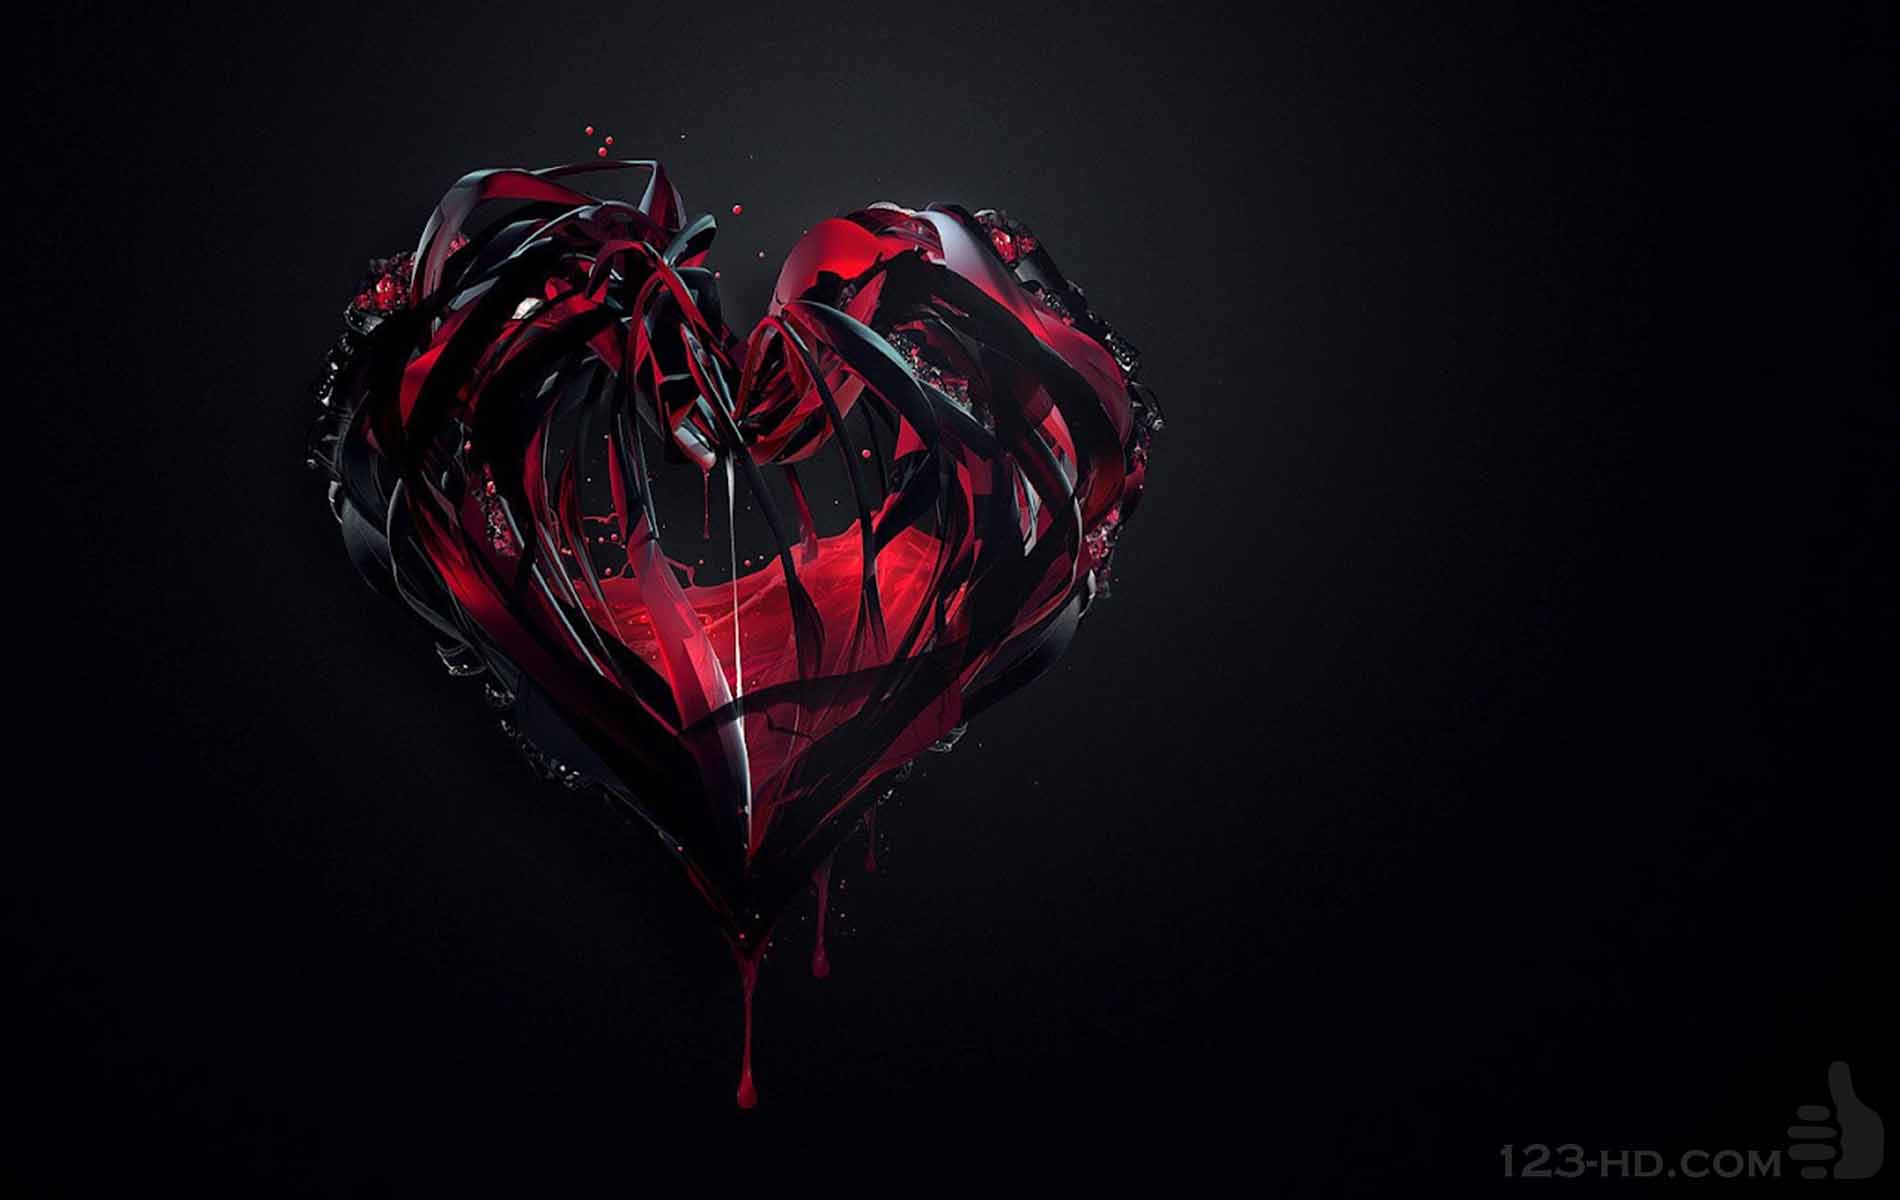 Black And Red Heart Wallpapers - Top Free Black And Red Heart